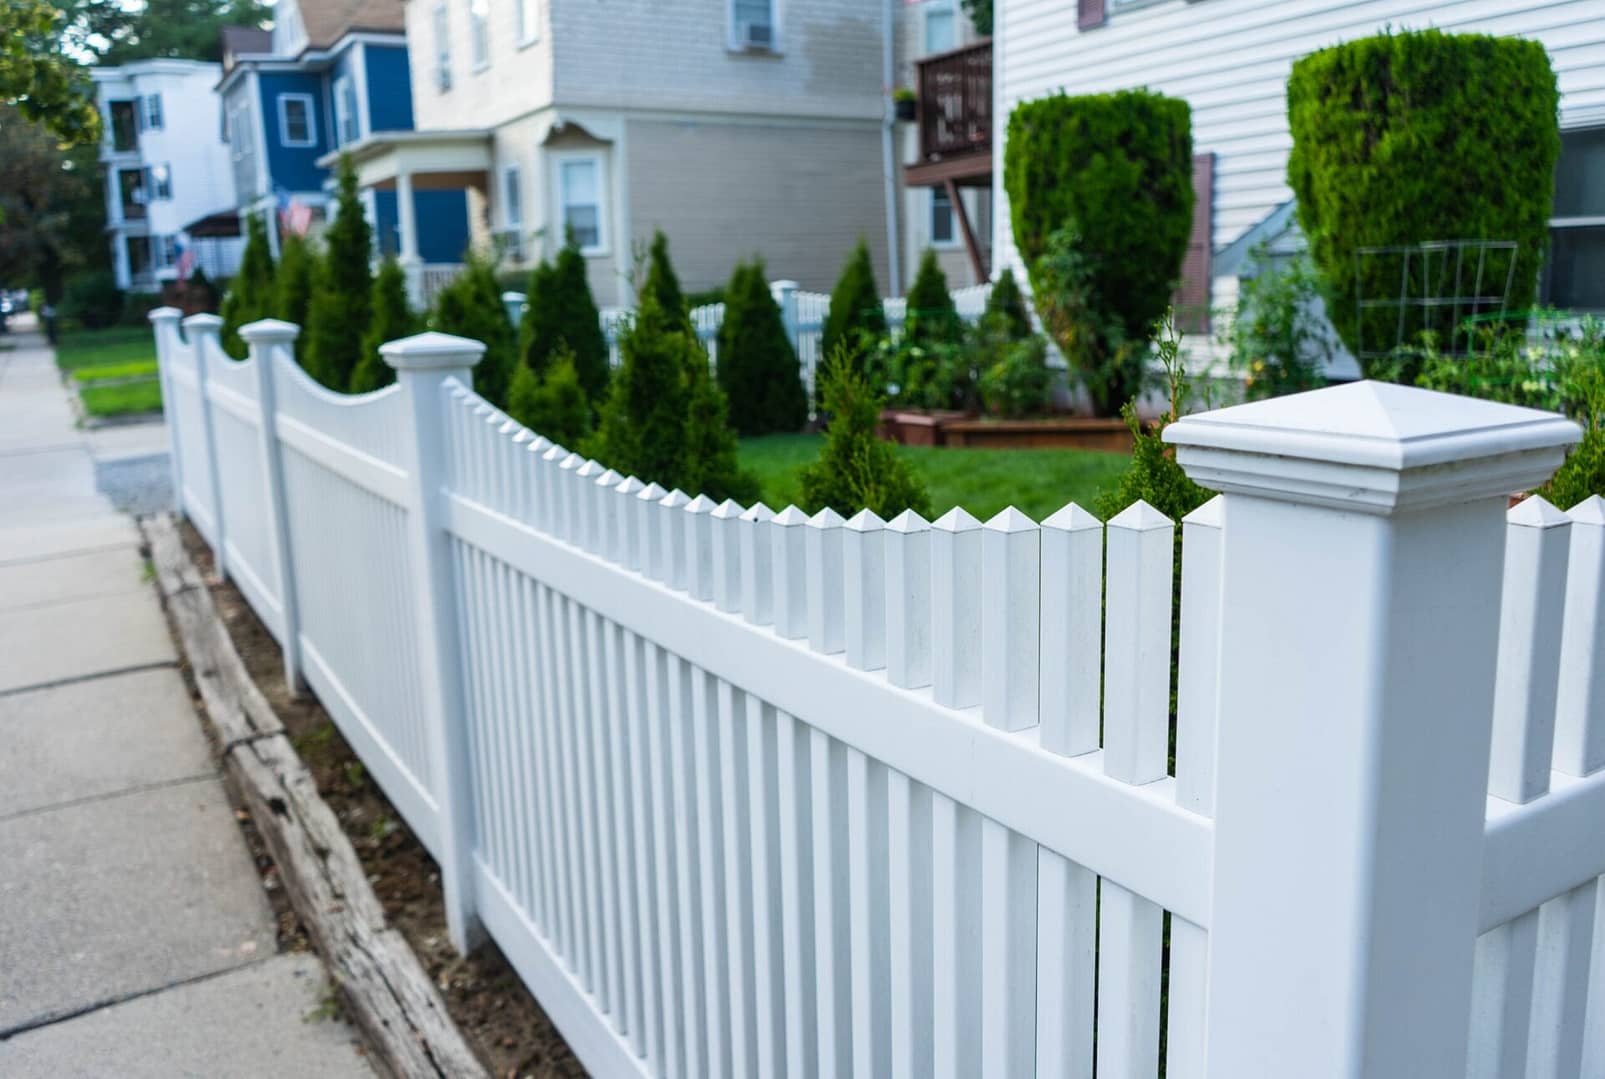 Vinyl fences have a well-earned reputation for being beautiful, durable, yet low-maintenance. Element Fence Company is an expert when it comes to vinyl fence installation and repair.